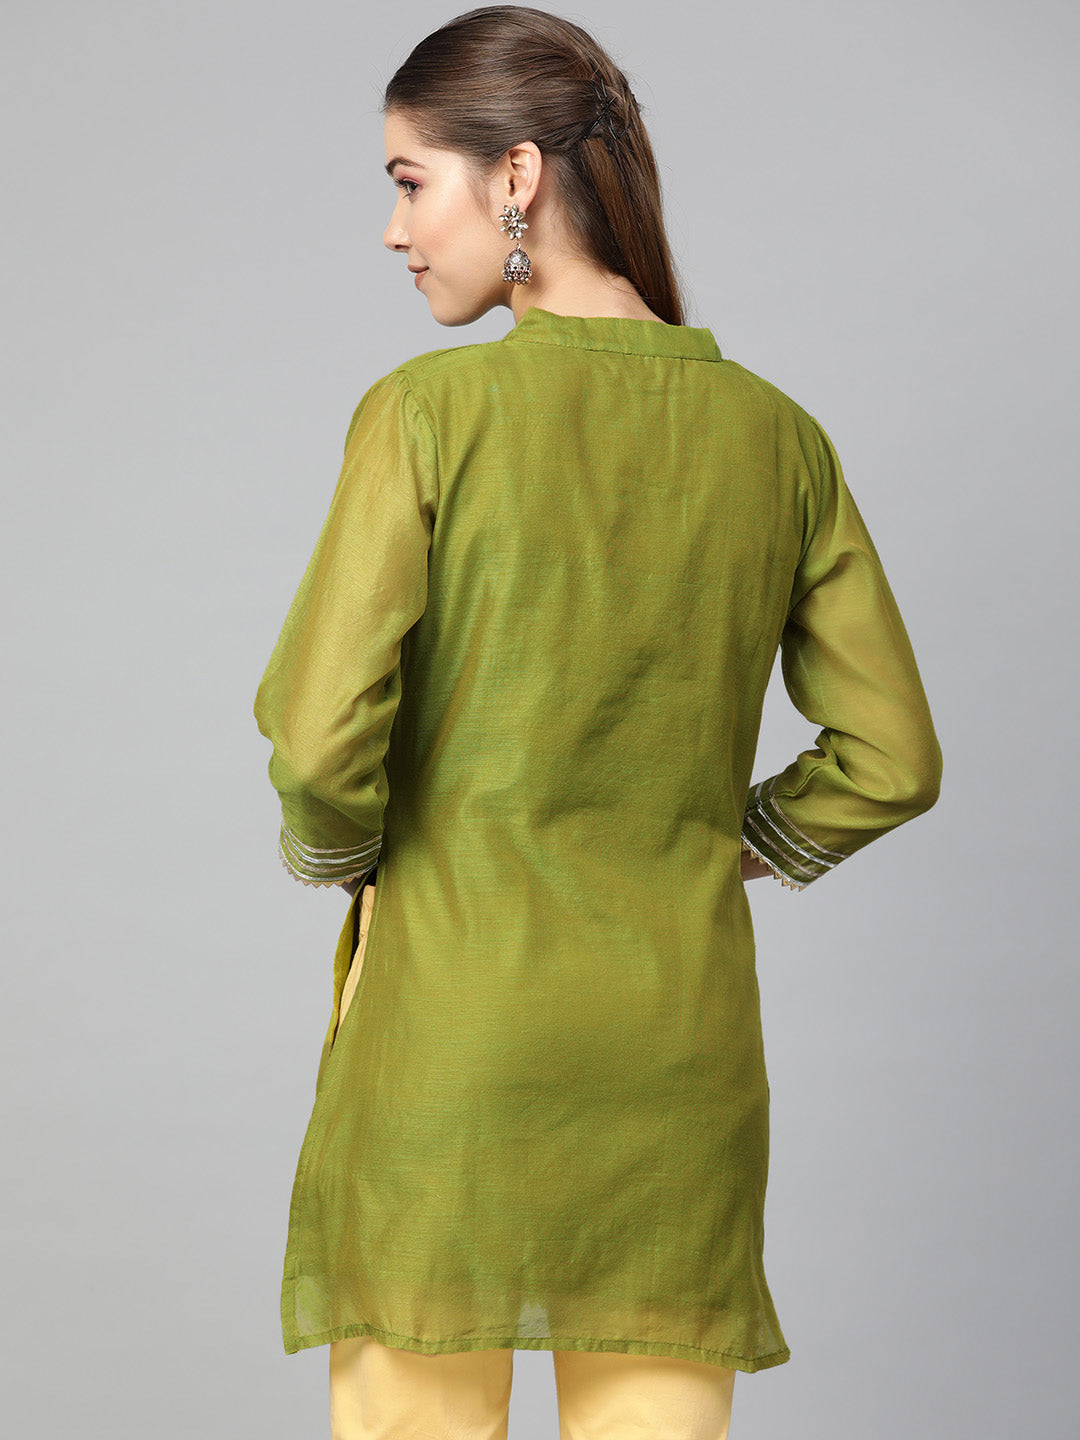 Bhama Couture Olive Green Silk Tunic